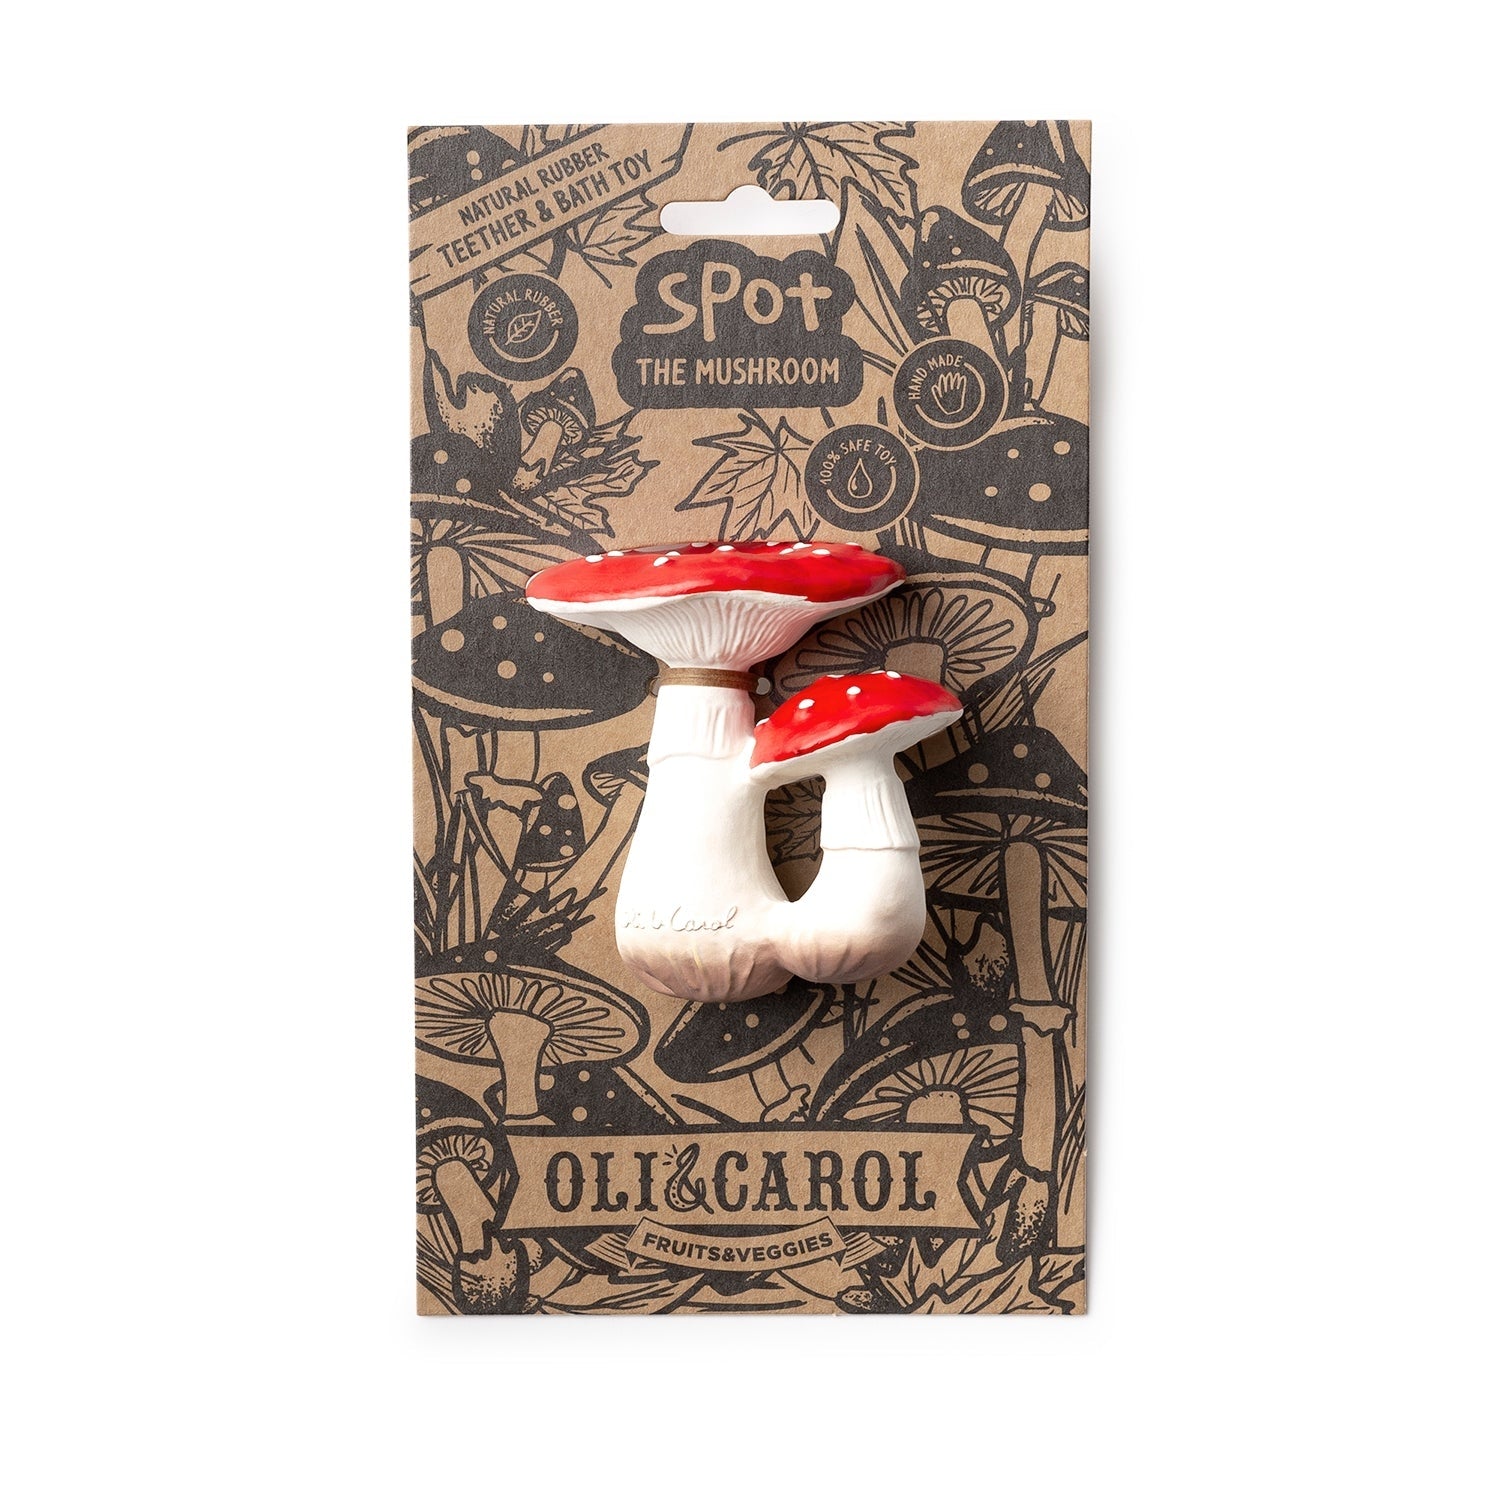 Spot the mushroom is a vegetable-shaped baby toy perfect for sensory play, and bath time - all the while introducing them to nature at an early age! Safe for kids, worry-free play! Oli & Carol products are made following an artisanal and sustainable process with 100% natural rubber from hevea trees.